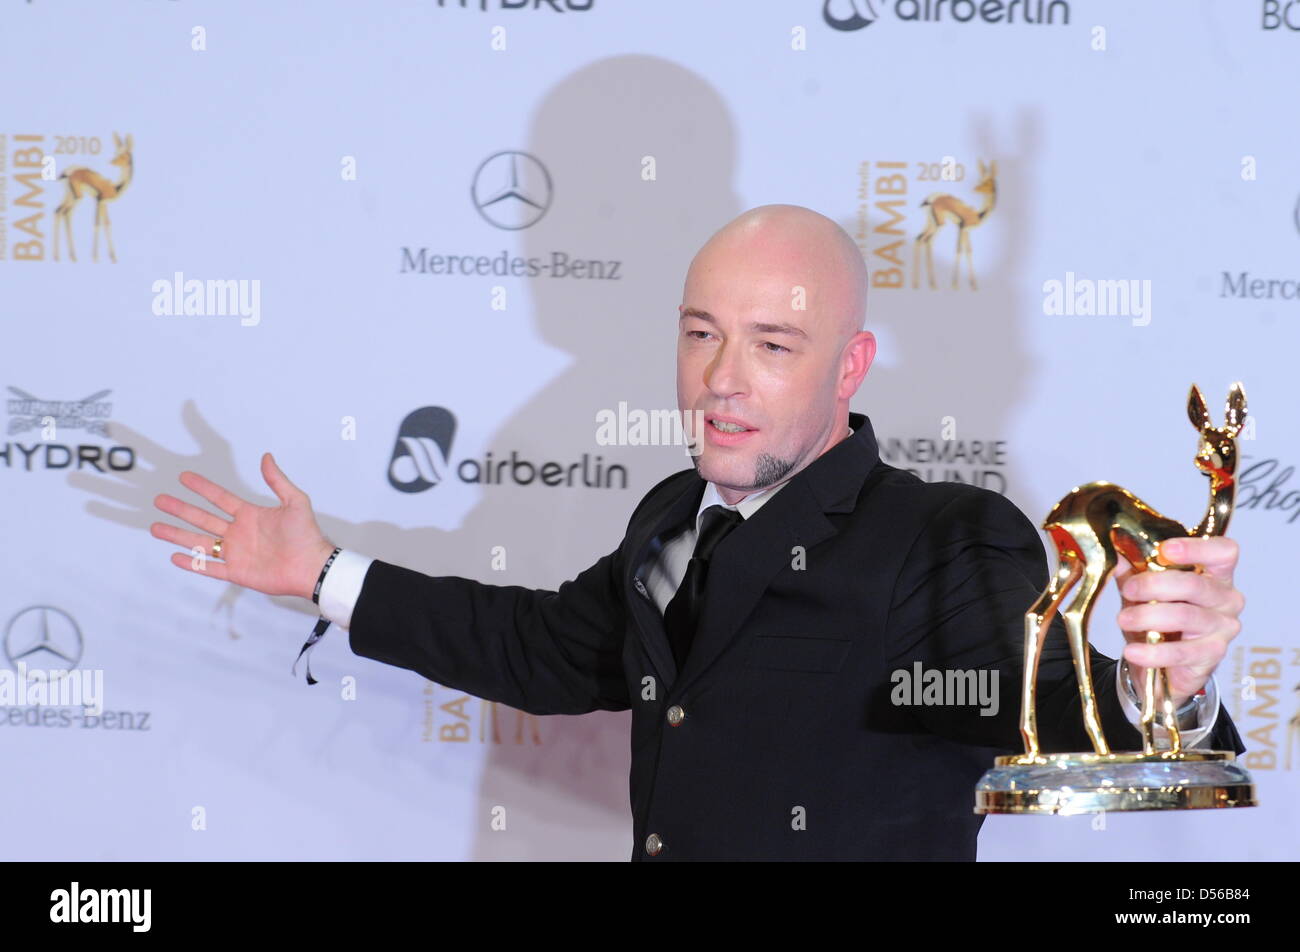 German singer Der Graf from Unheilig poses after receiving the Bambi Trophy with German actor Hannes Jaennicke during 62nd Bambi award in Potsdam, Germany, 11 November 2010. The Bambi is Germanys main media award. Photo: Jens Kalaene dpa/lbn  +++(c) dpa - Bildfunk+++ Stock Photo